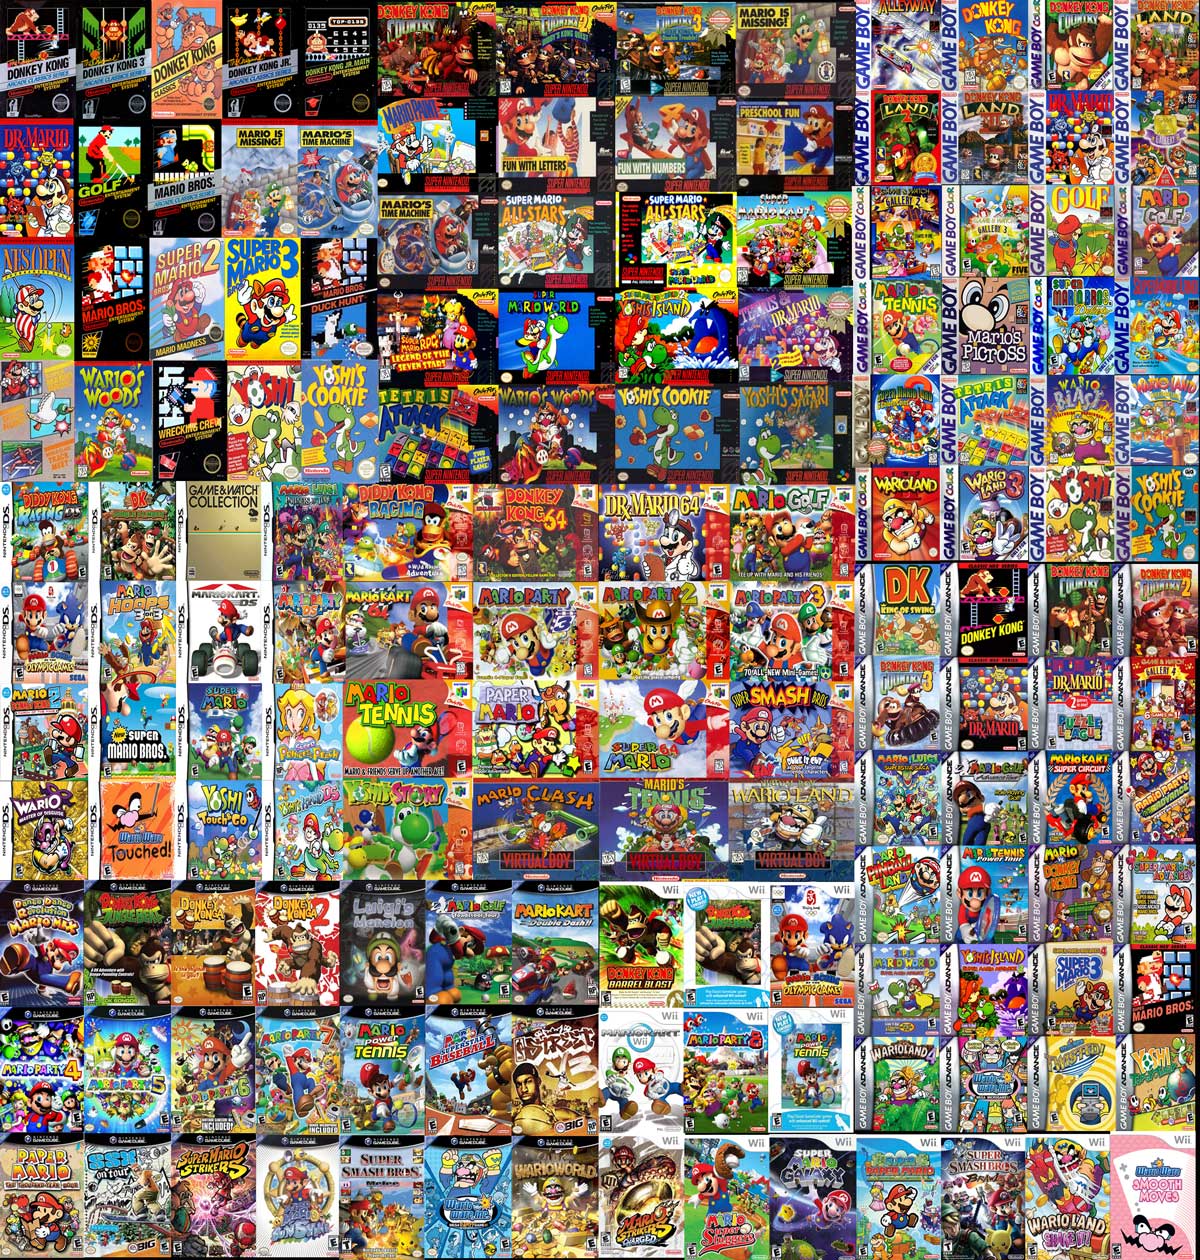 Loads and loads of Mario games